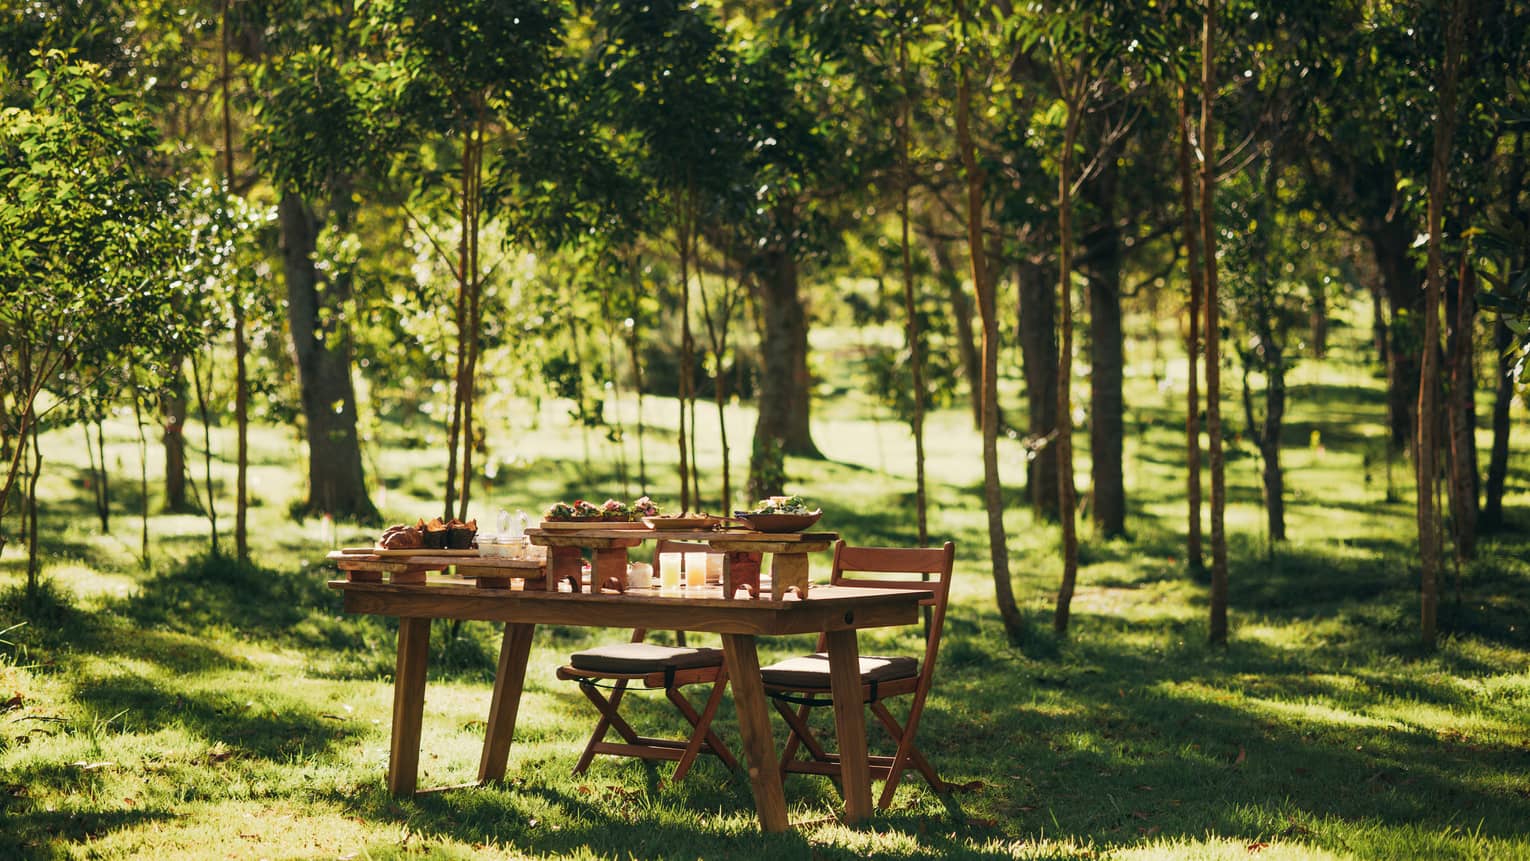 Dining table and two chairs outdoors on green grass, trees in the background